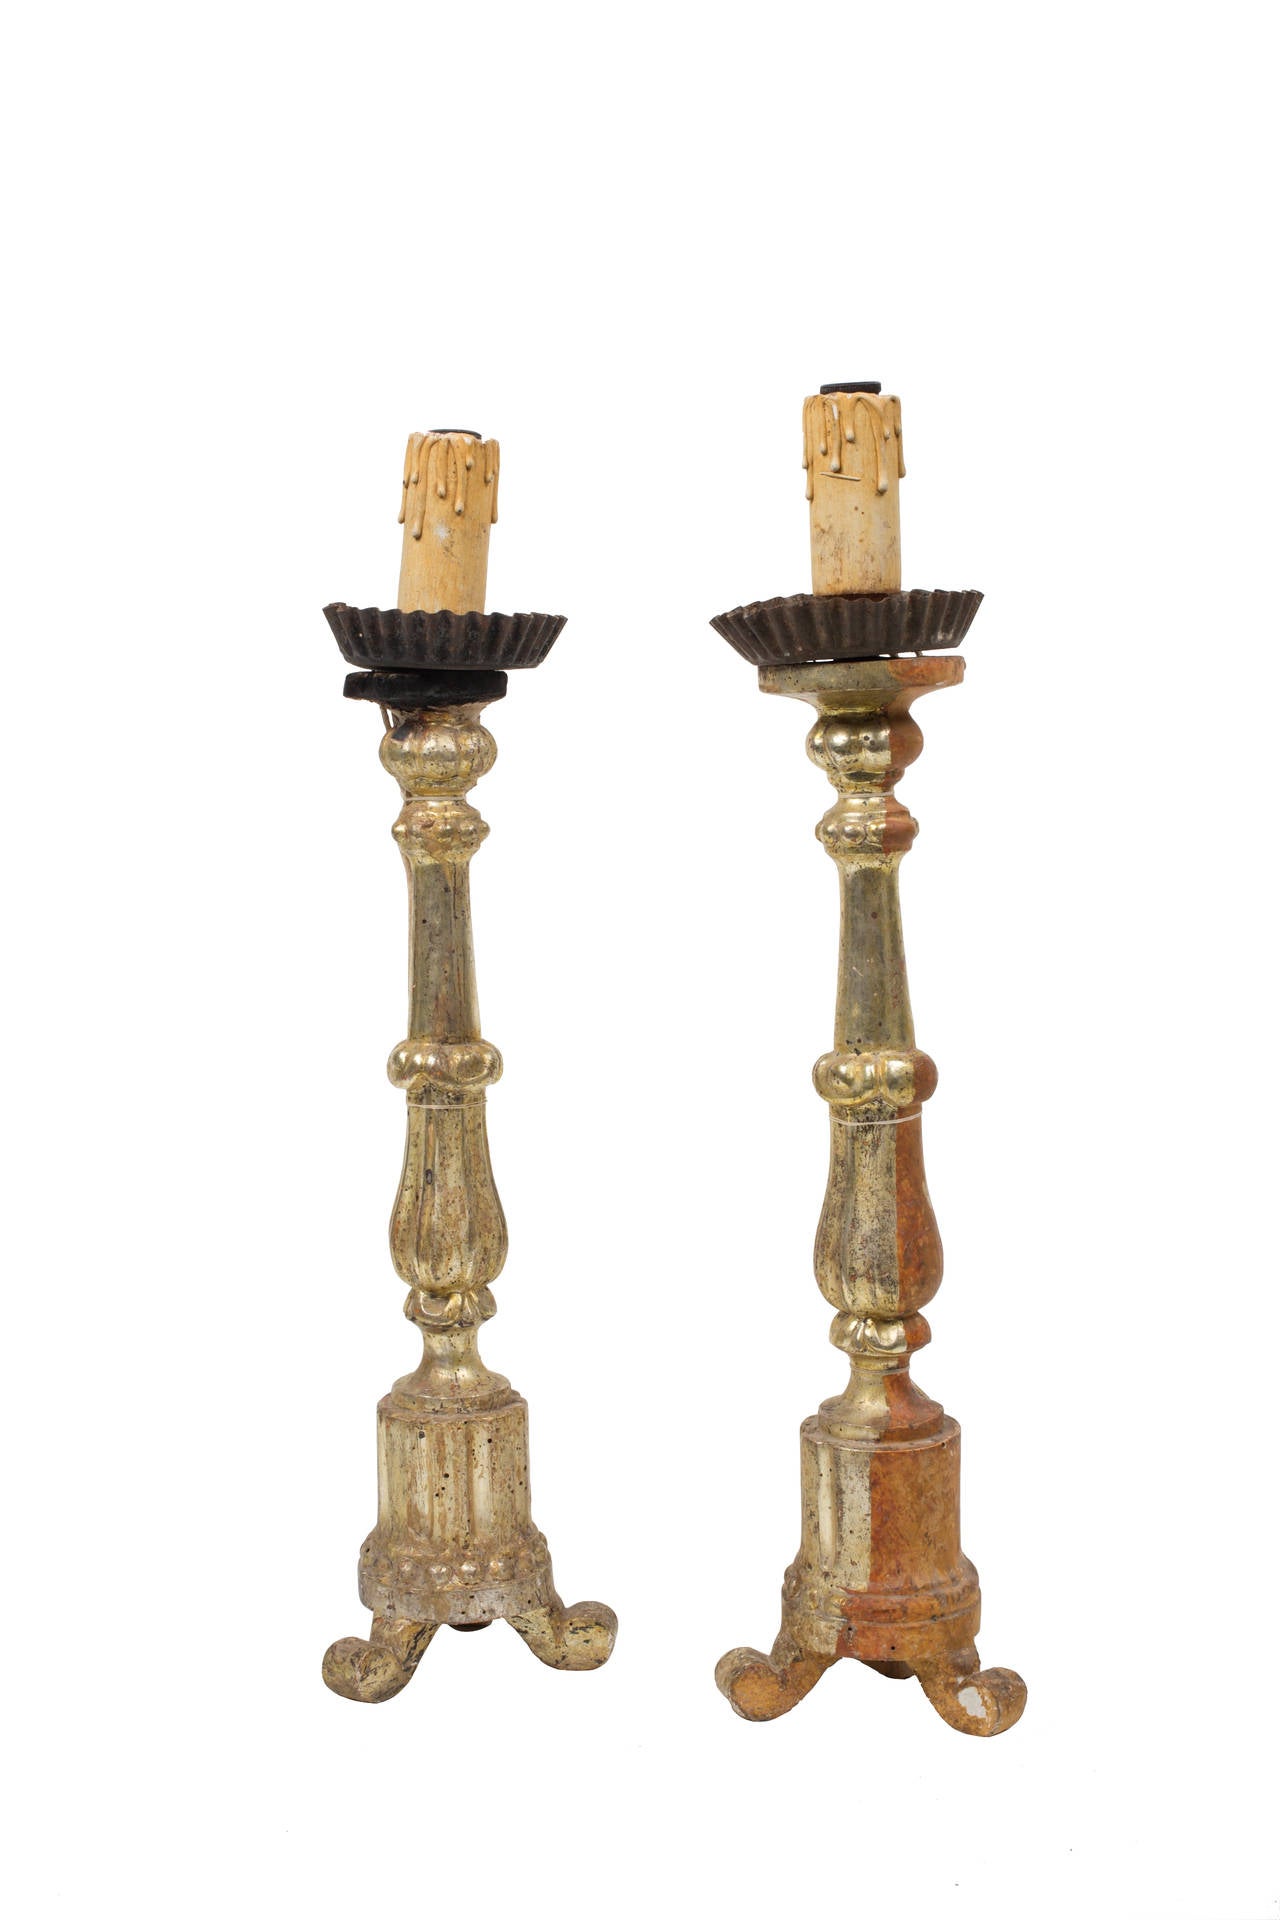 Pair of antique candlesticks with beautiful original gild from Italian altar. Front sides are gilded with original wood exposed at back for altar setting. Cork and wood like material legs show damage.

Wear consistent with use and age. Gild has